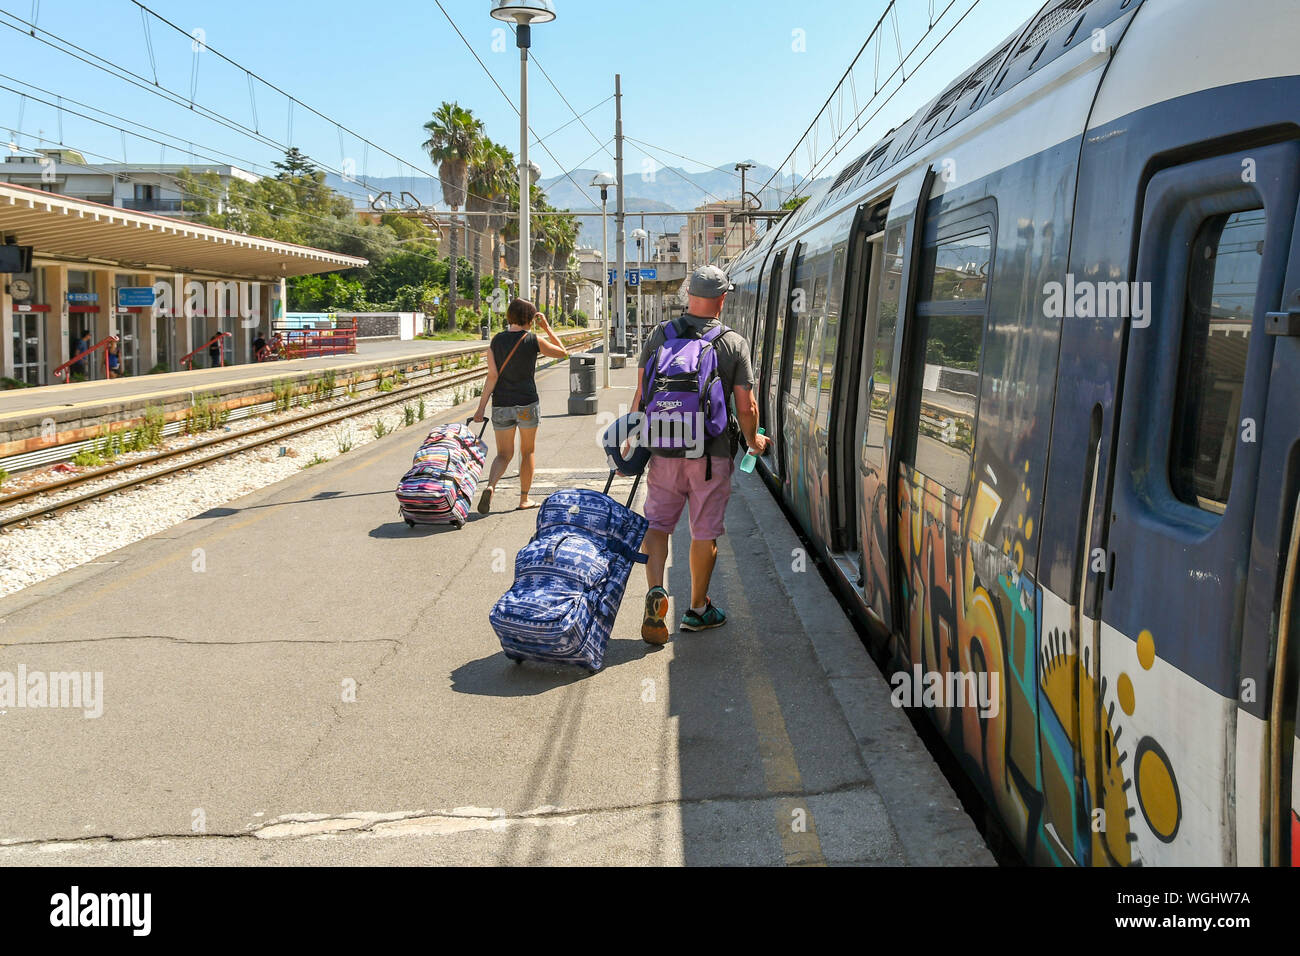 SORRENTO, ITALY - AUGUST 2019: People pulling suitcases along the platform to catch a train at Sorrento railway station. Stock Photo